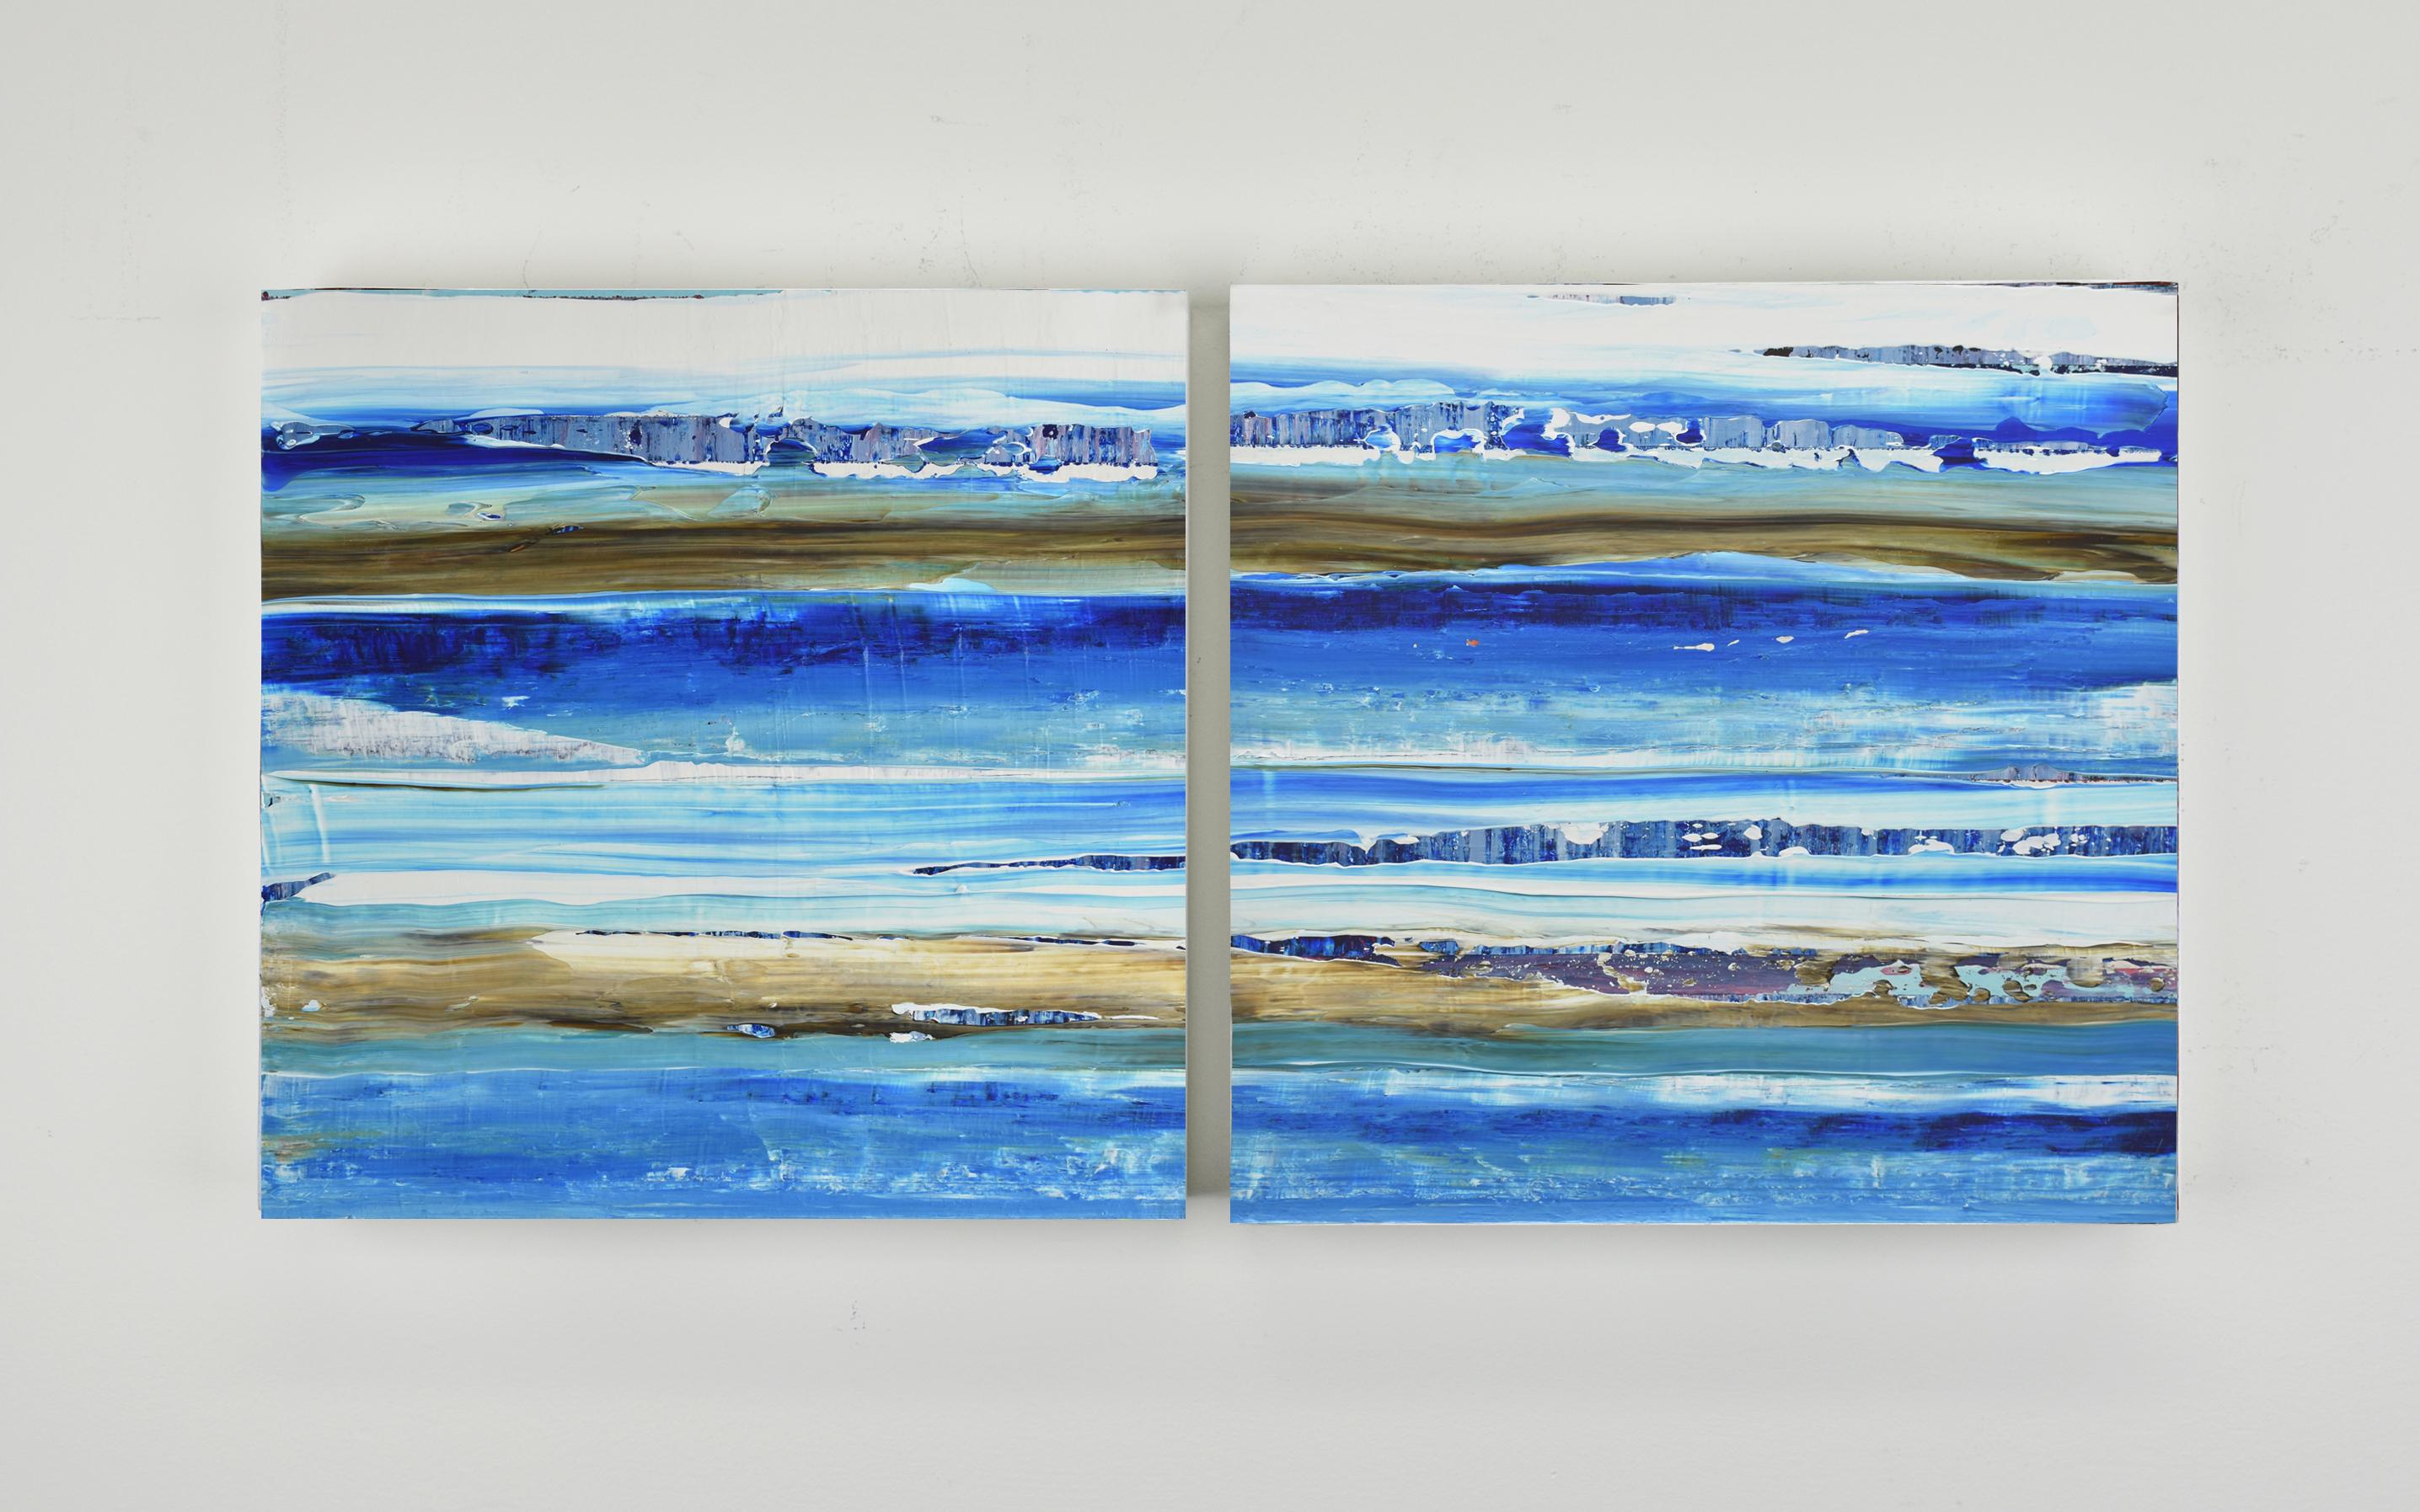 <p>Artist Comments<br /> Part of artist Lisa Carney's Aqua series inspired by the Chaleur Bay in Canada where she grew up. Lisa layered a rich palette of blues, greens, purple and white to build her abstract representation of the gentle waves across